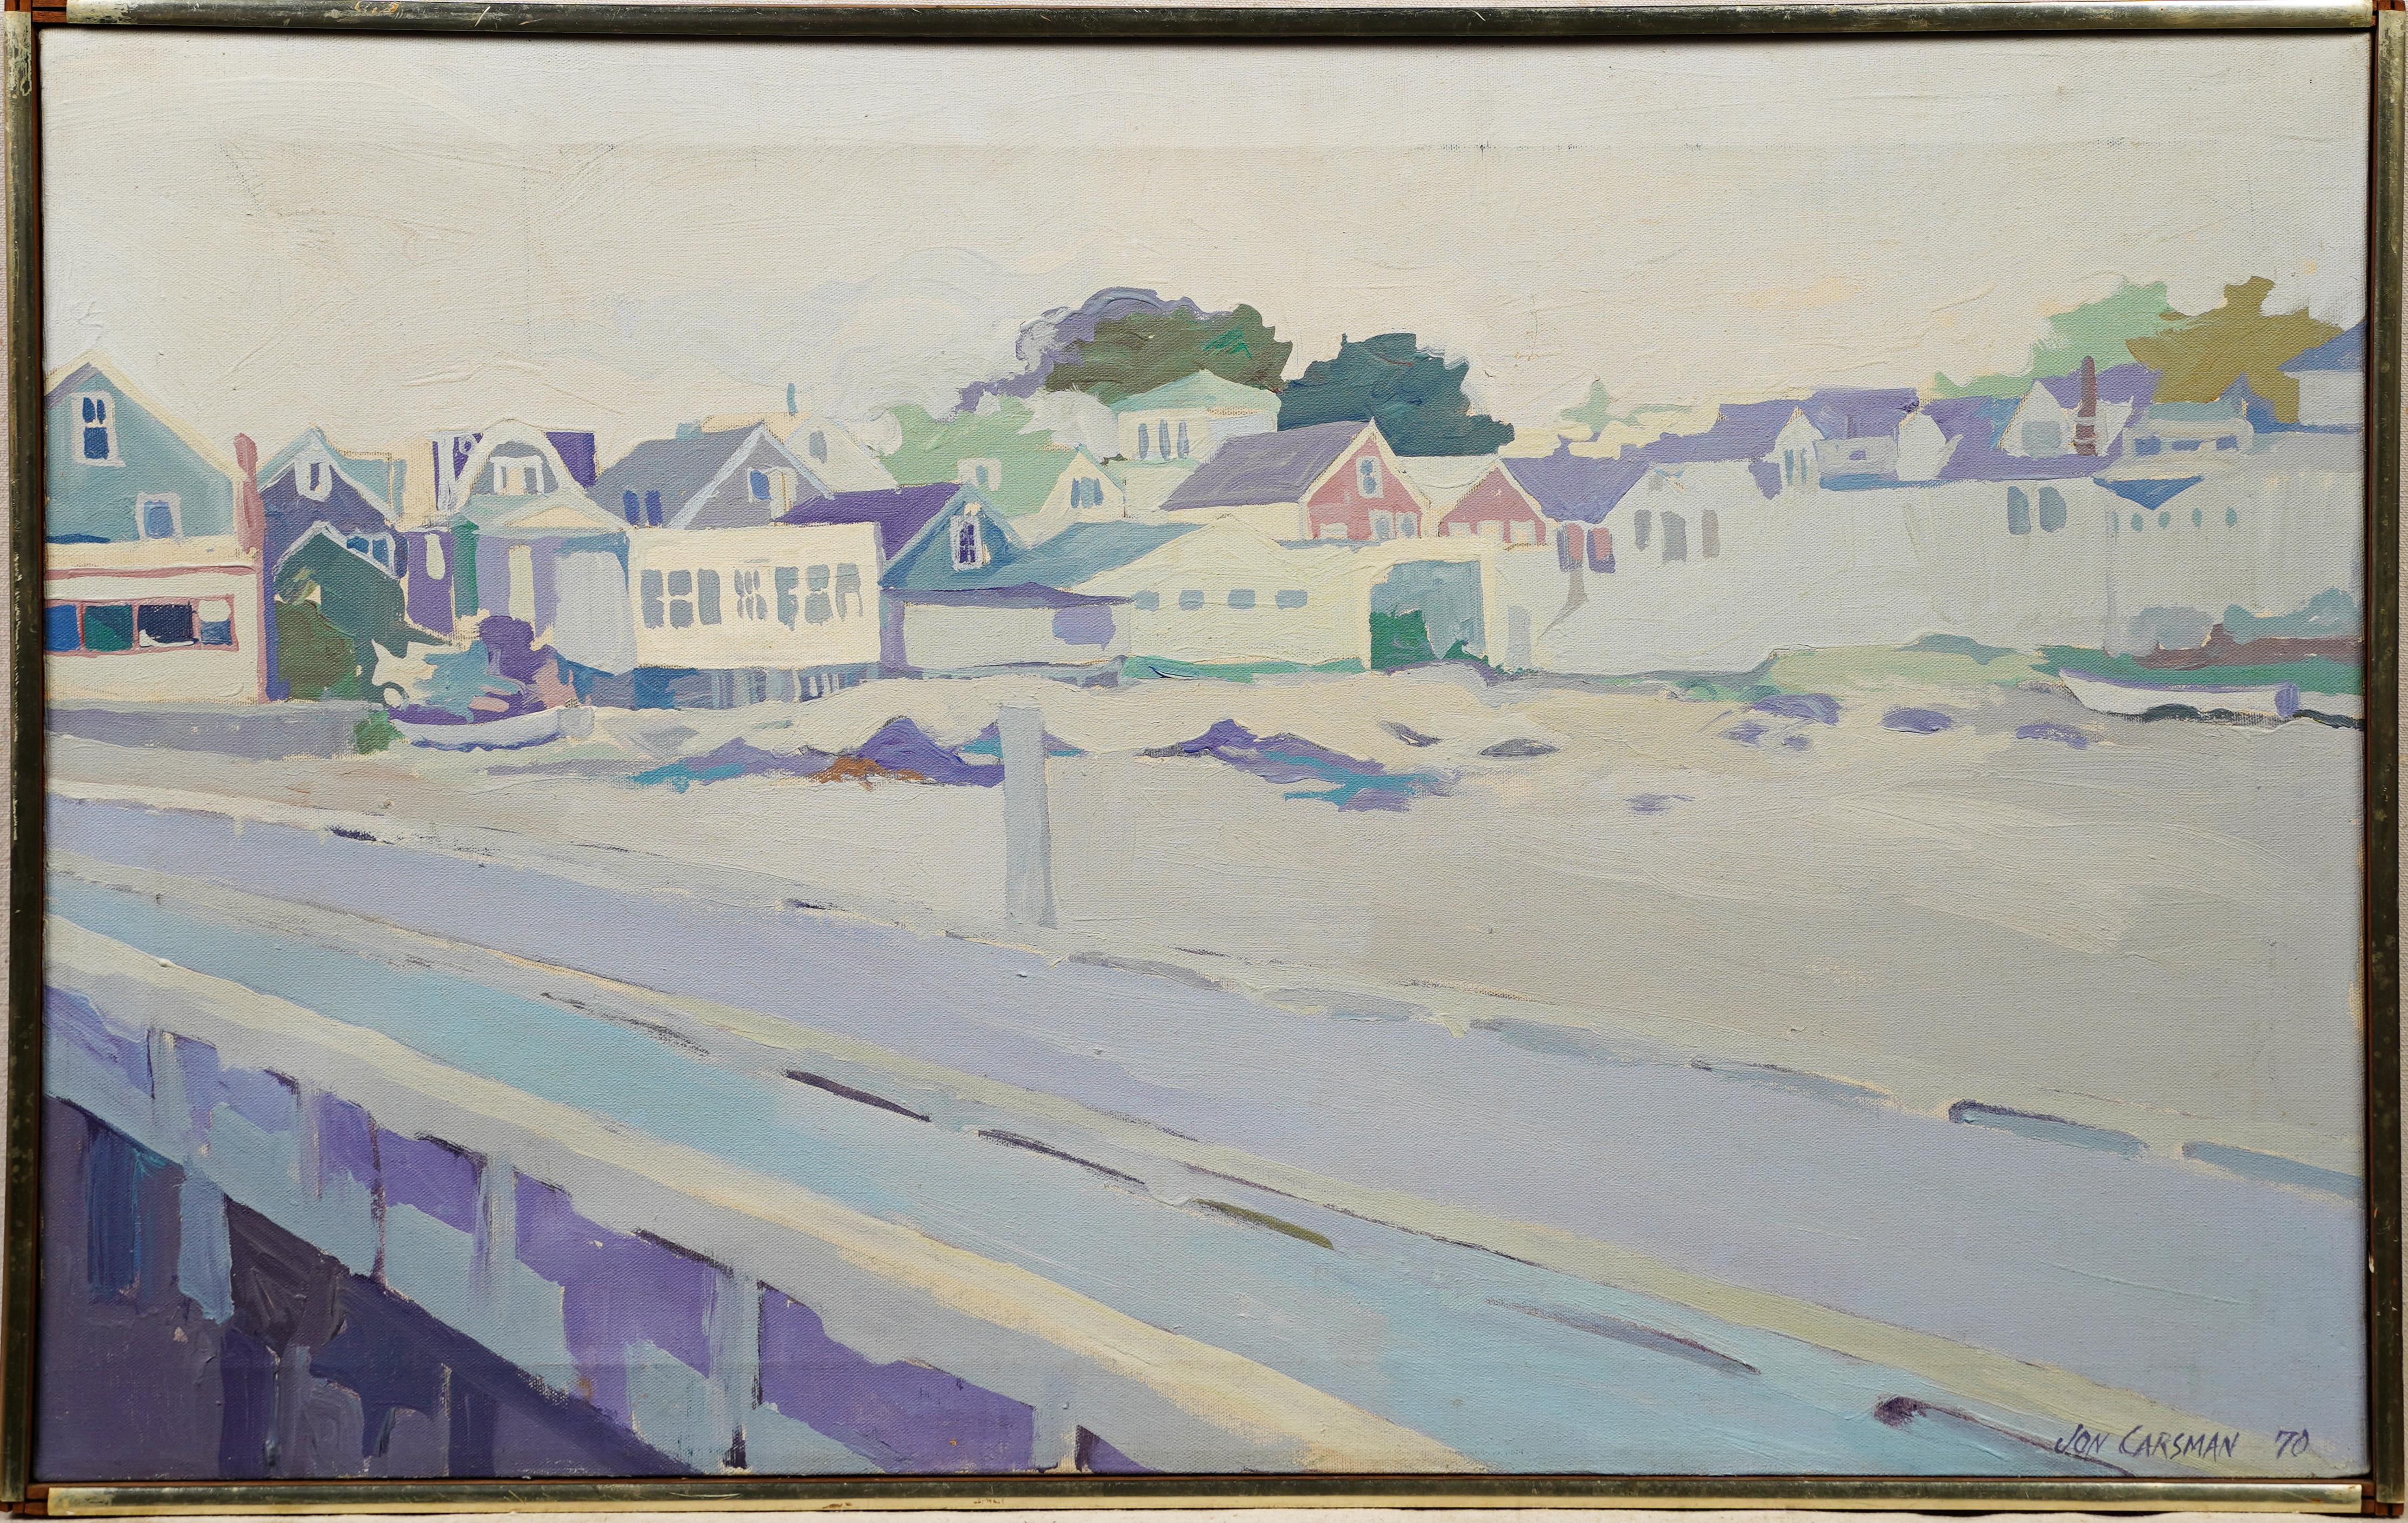 Antique American modernist coastal beach town oil painting by Jon Carsman (1944 - 1987).  Oil on canvas.  Framed.  Signed.